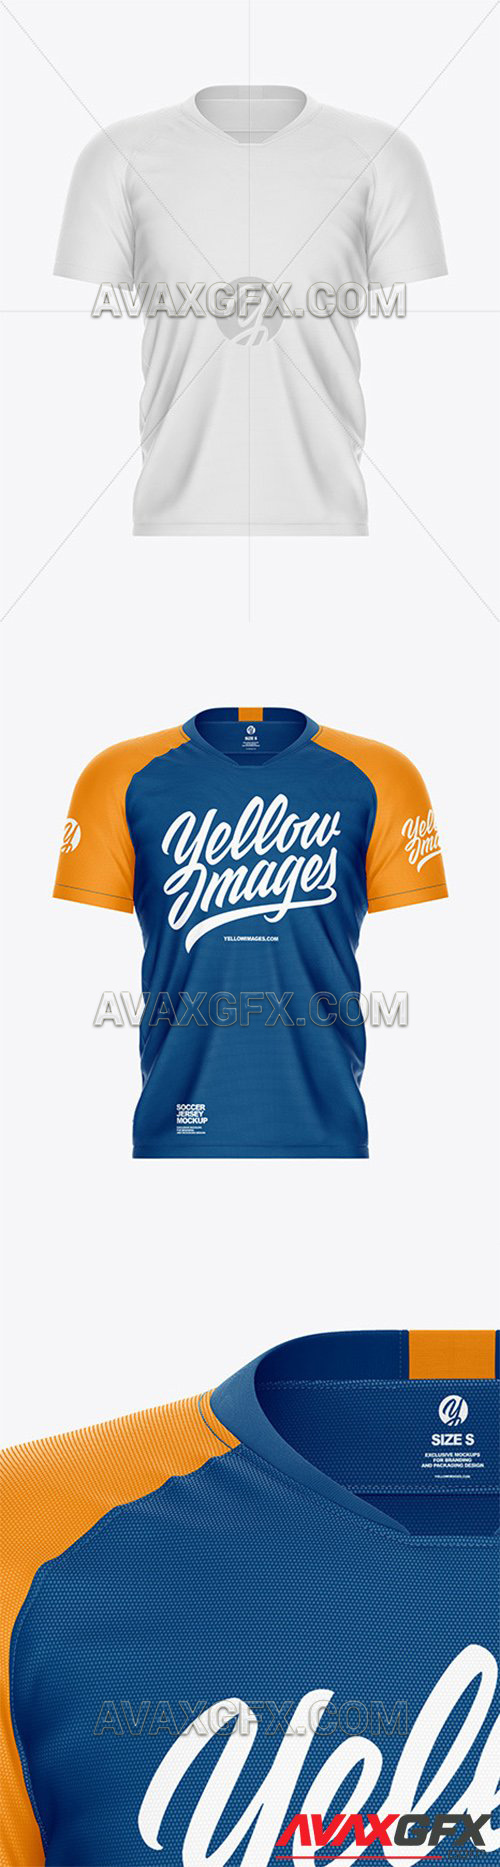 Men's Soccer Jersey Mockup - Front View 57454 » AVAXGFX ...